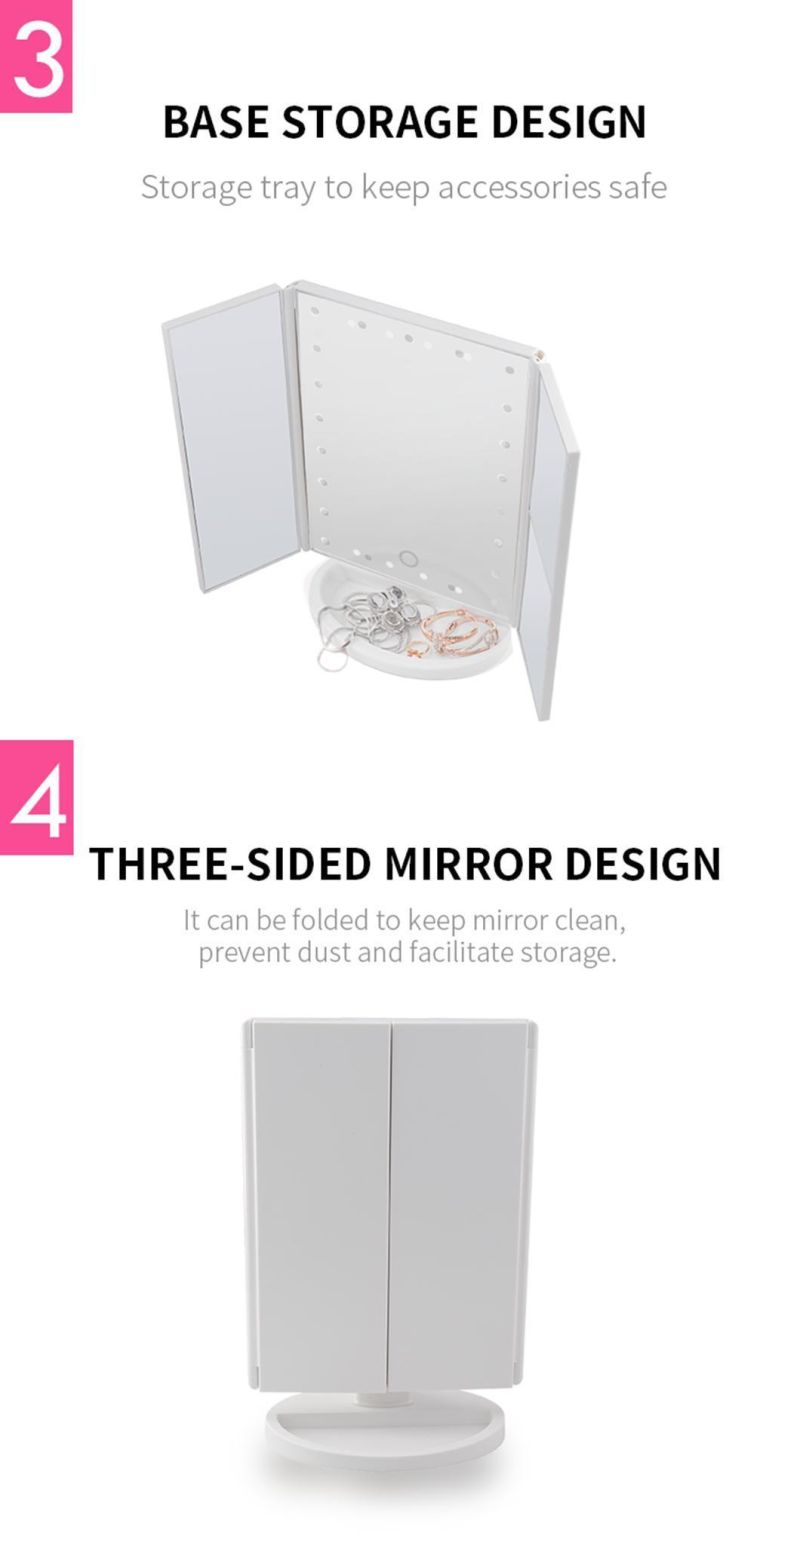 Pritech Foldable Desktop Cosmetic Makeup Mirror with LED Light